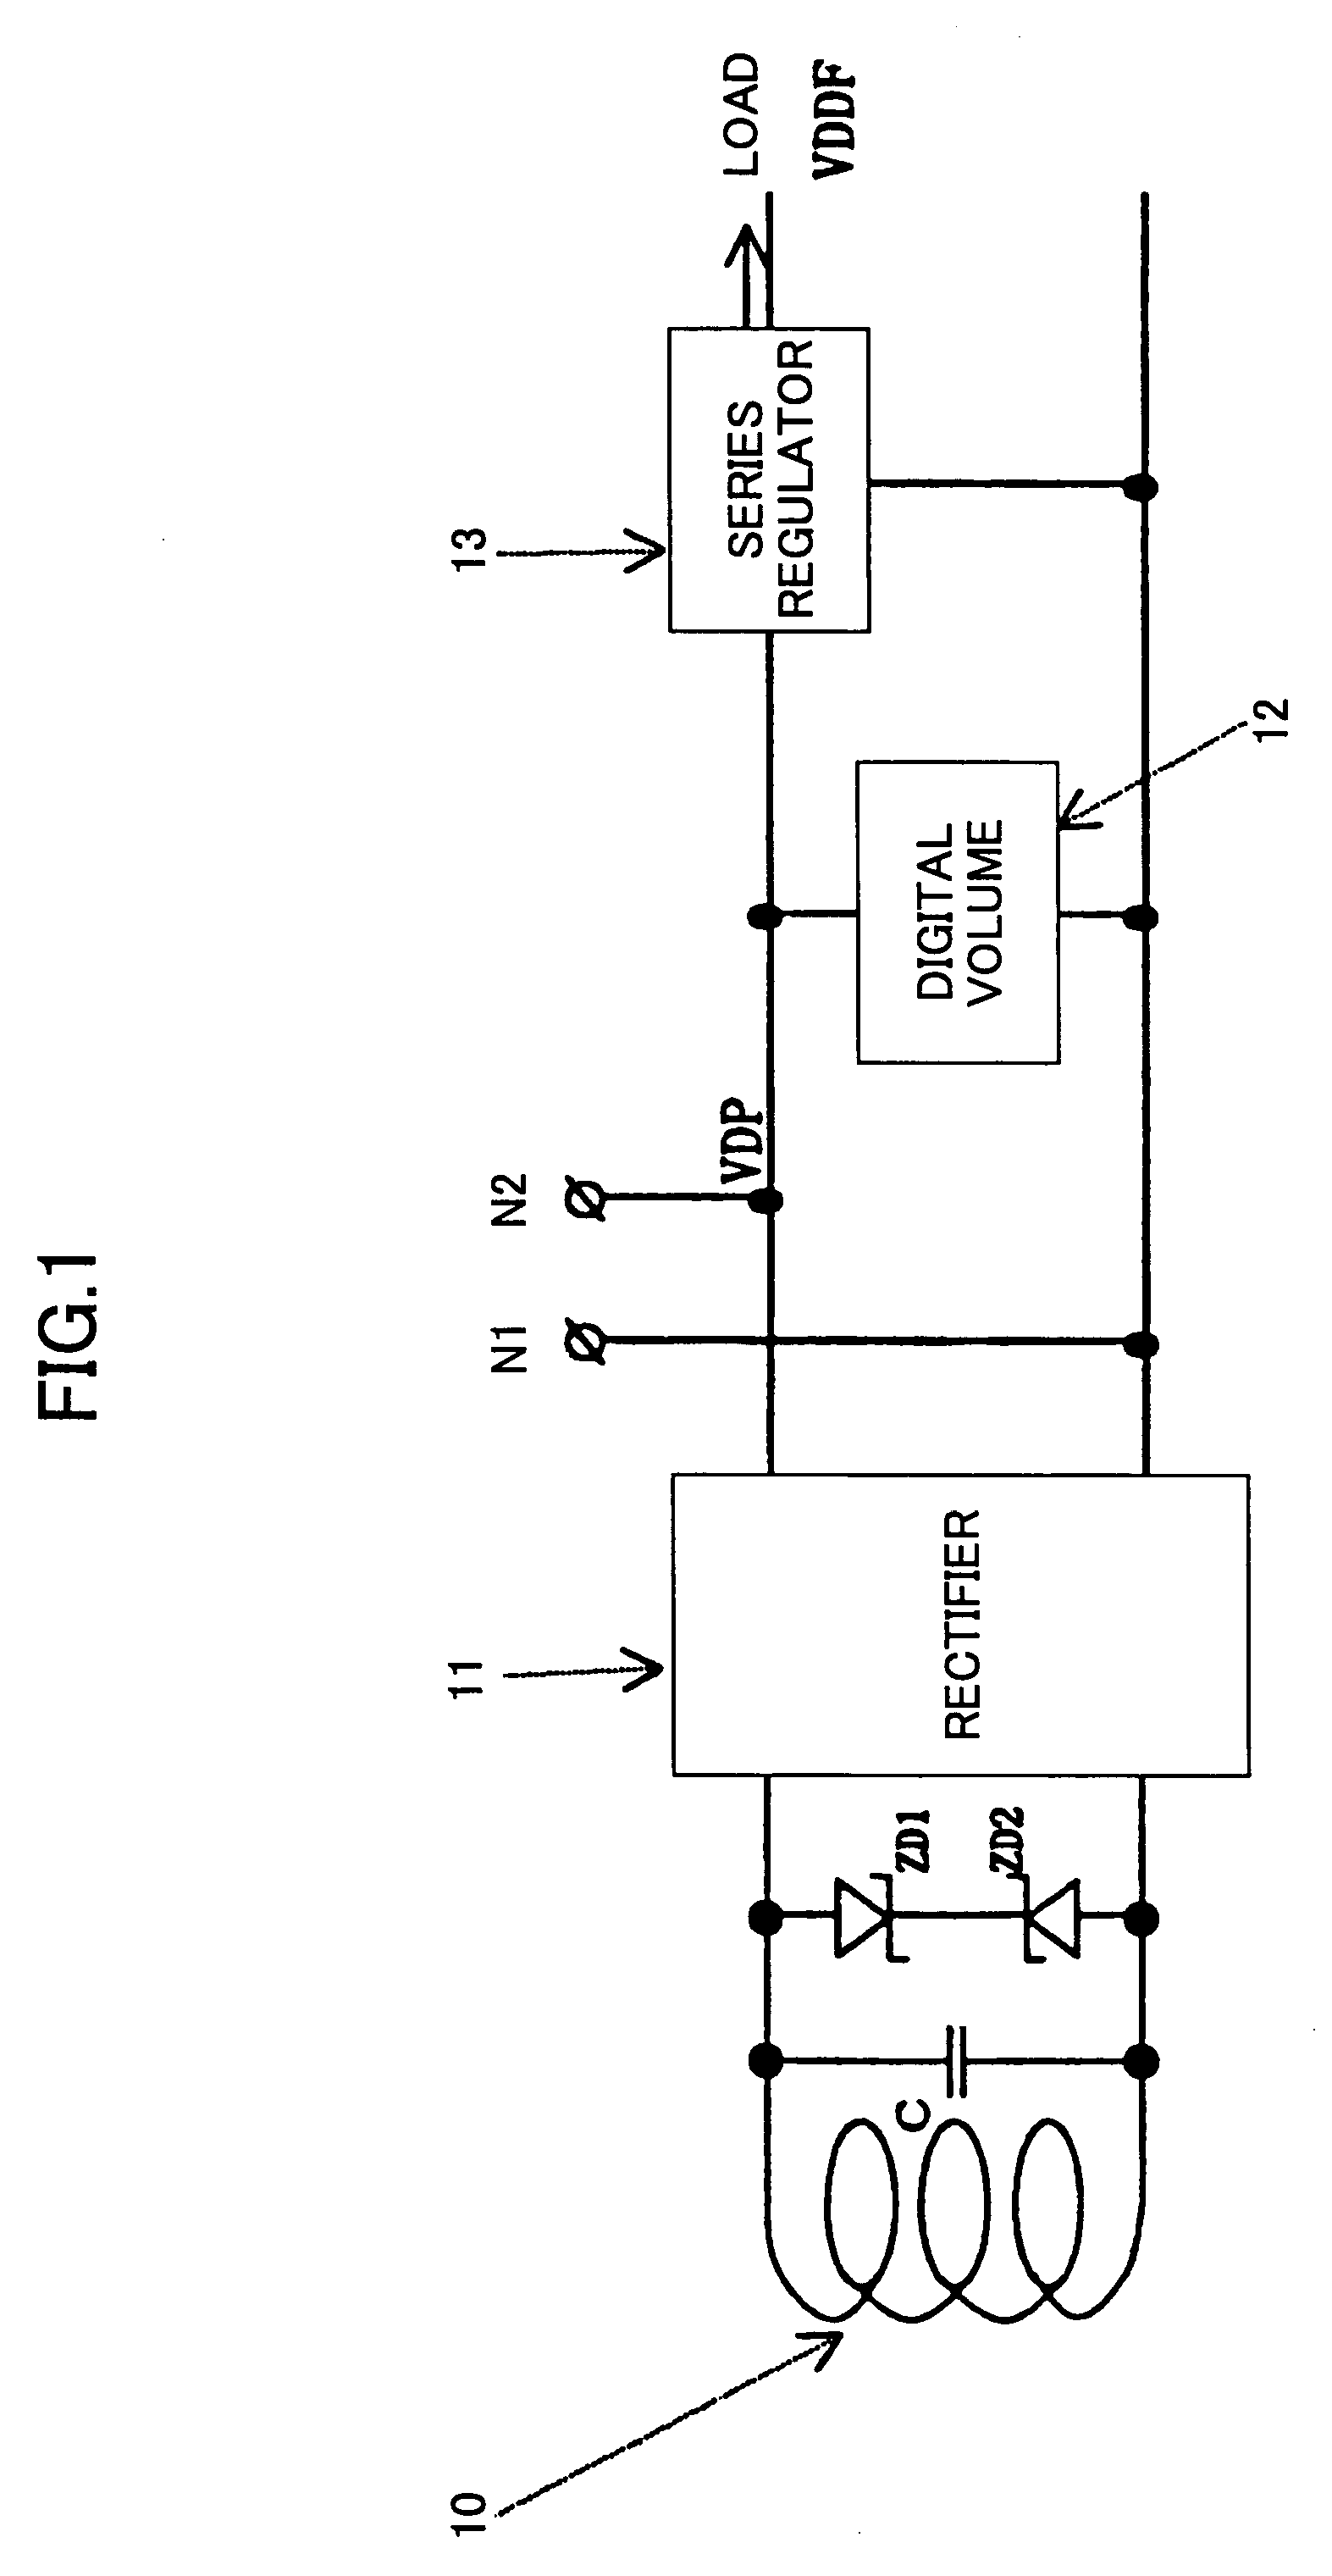 Power supply circuit that is stable against sudden load change